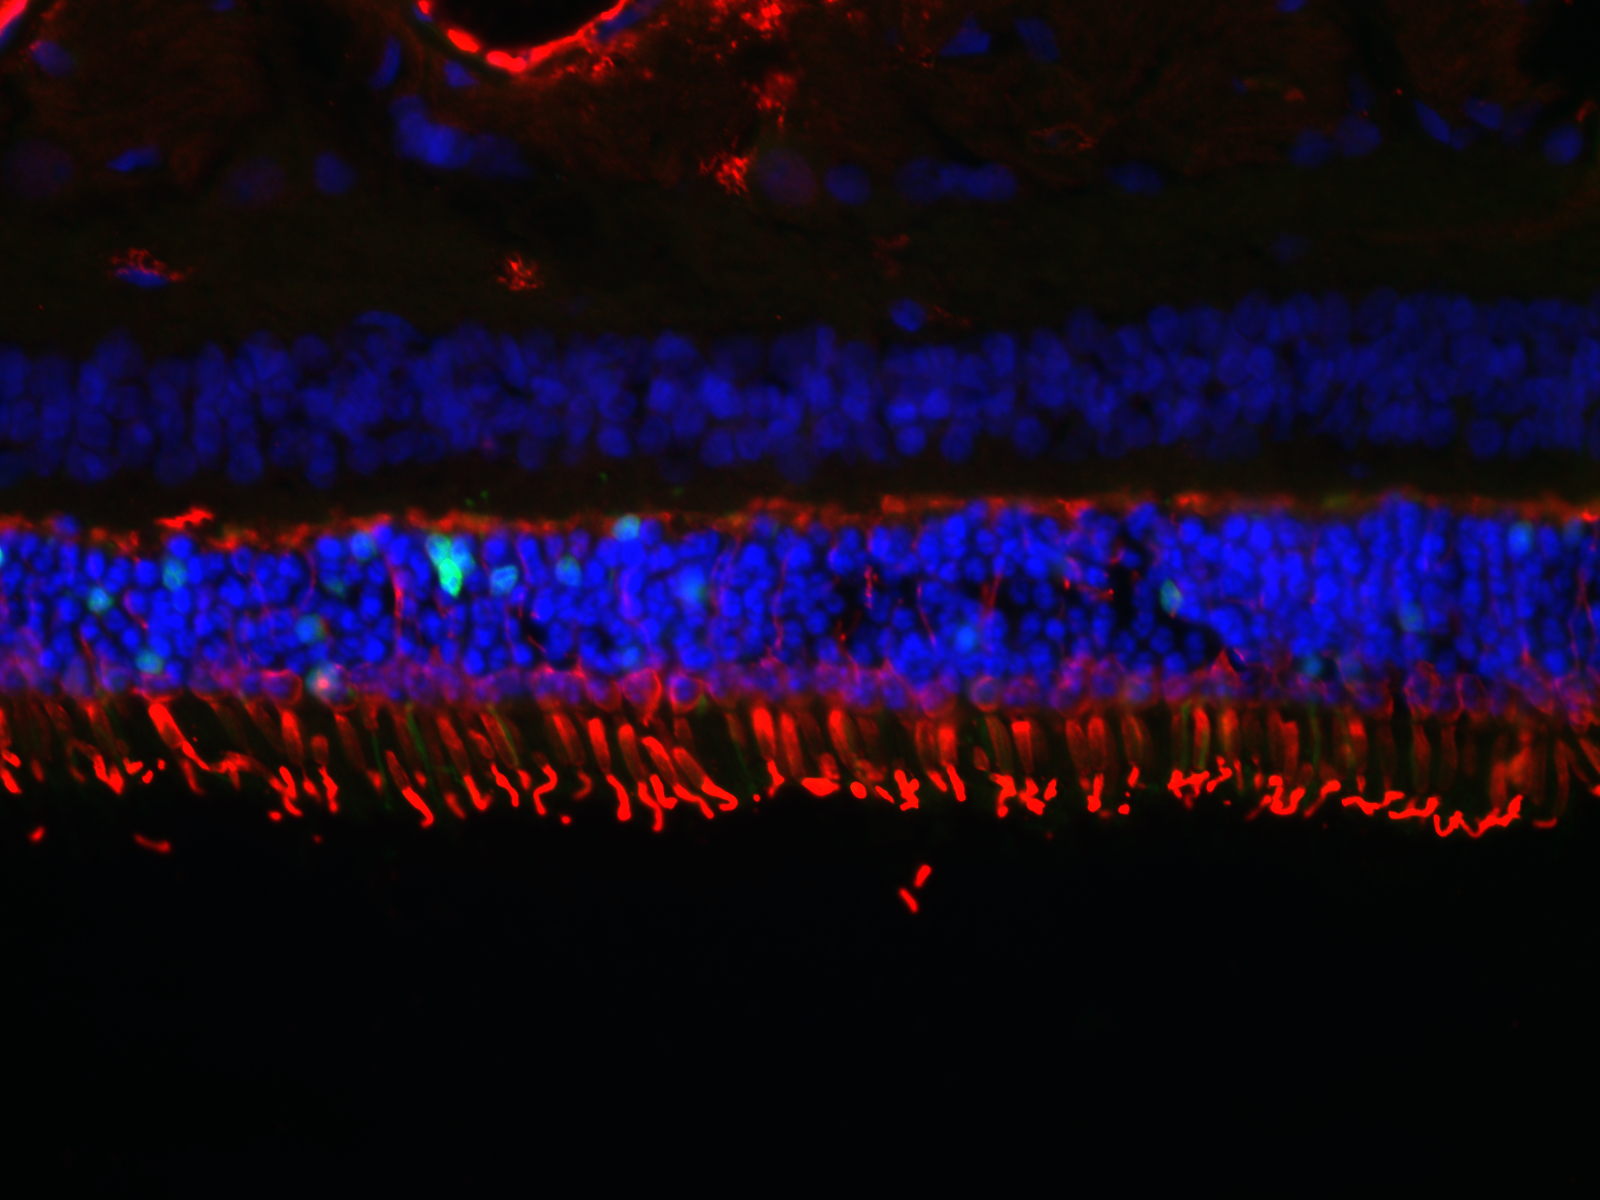 microscopic image of retinal tissue layers labeled in red and blue